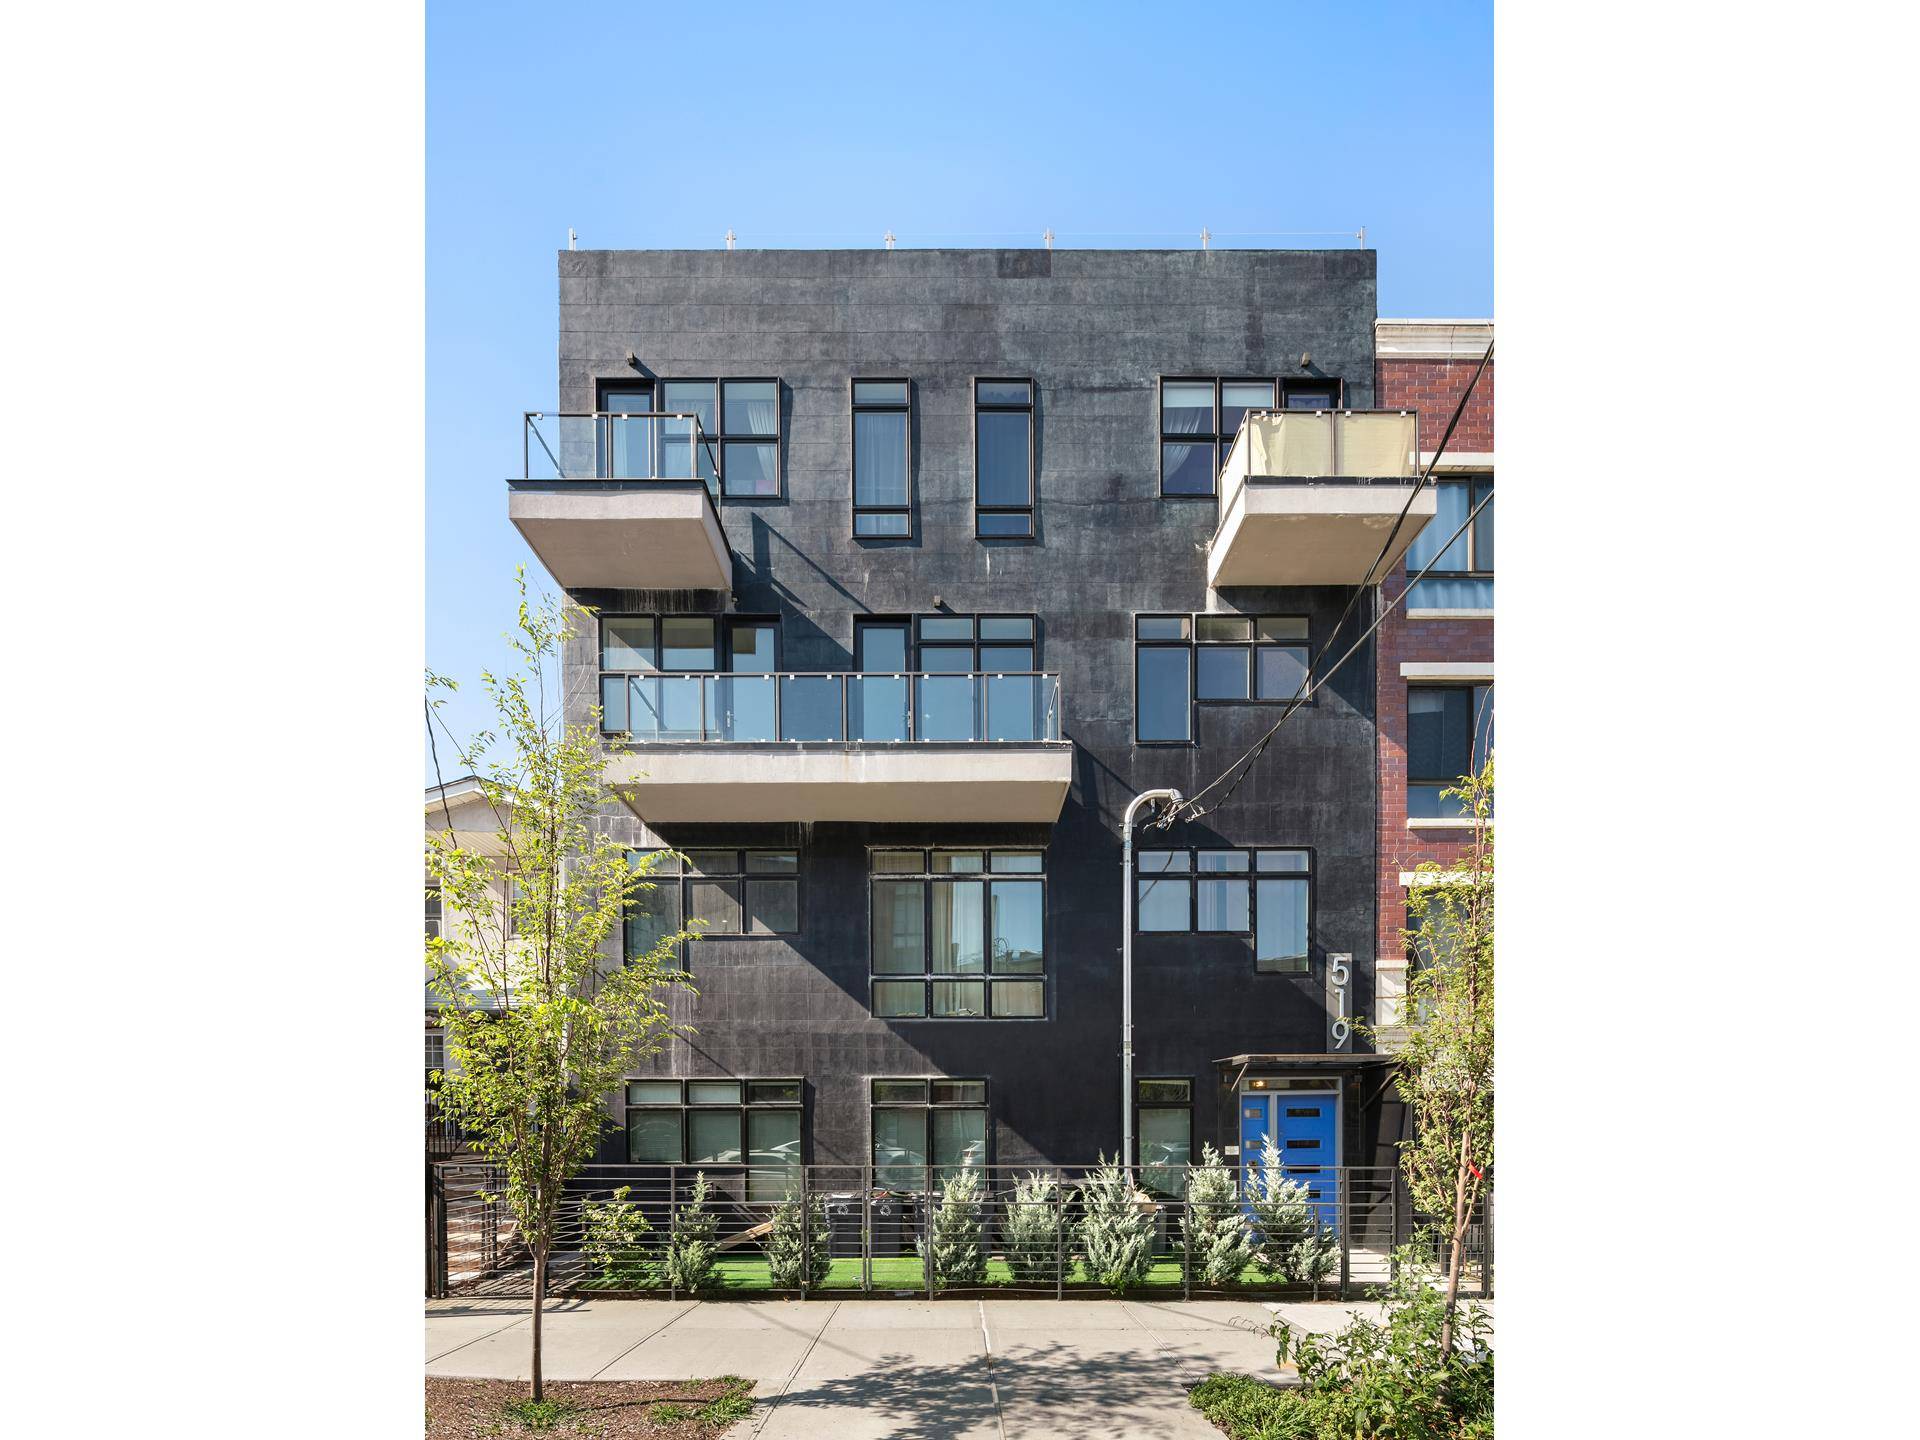 Introducing 2R at 519 Maple Street A fantastic opportunity to own a 2 bed 2 bath apartment in a prime Crown Heights new development !